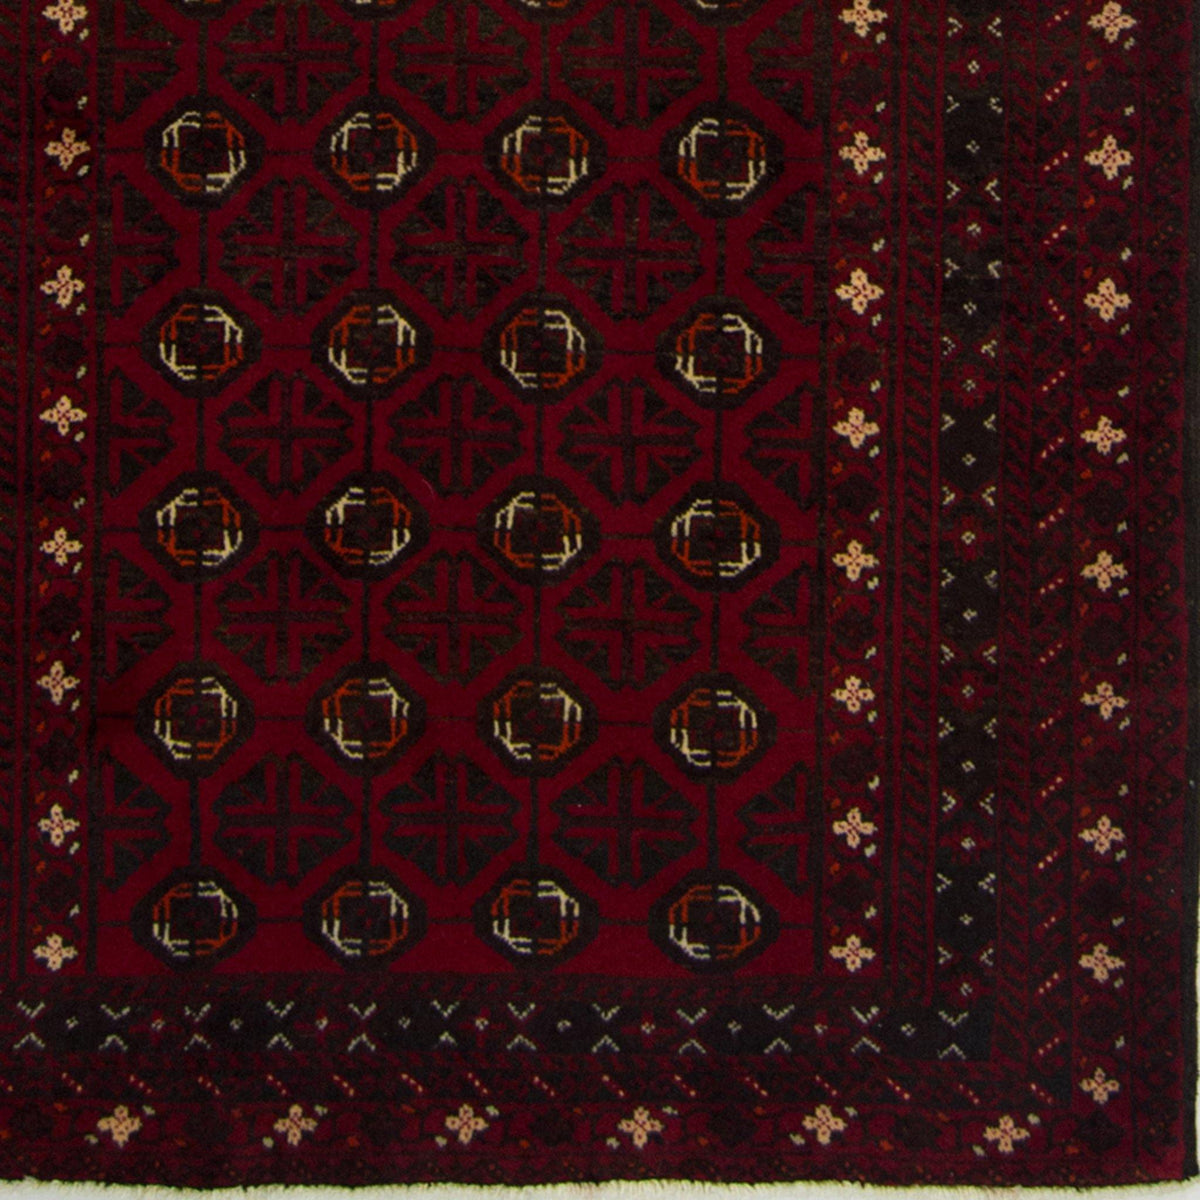 Fine Hand-knotted Persian Wool Baluchi Rug 105cm x 204cm